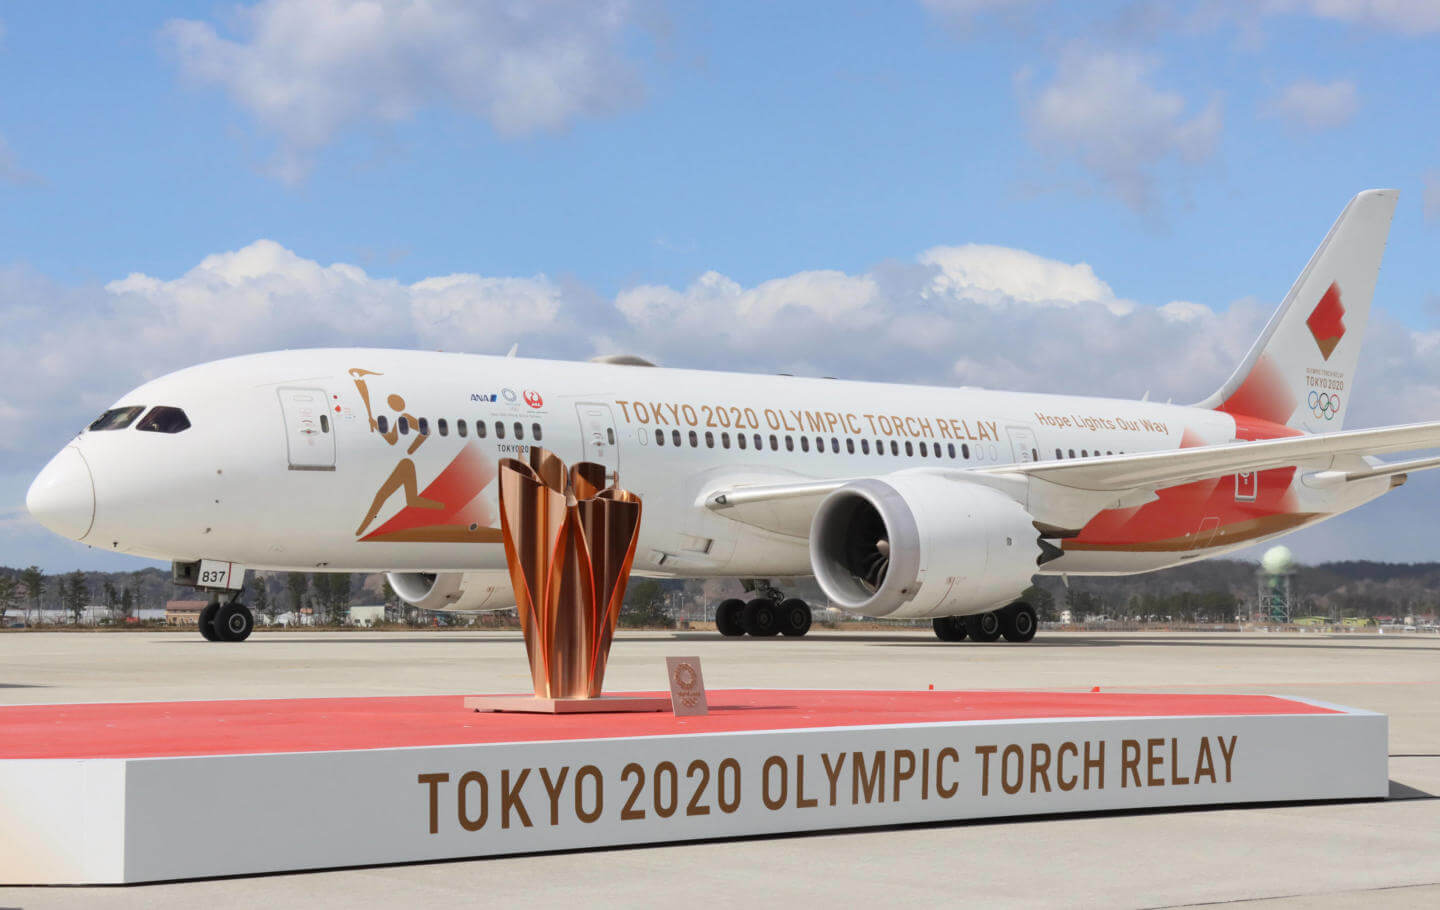 March 20, 2020, Higashi Matsushima, Japan - A special plane carrying the Olympic flame arrives at the Matsushima air bas